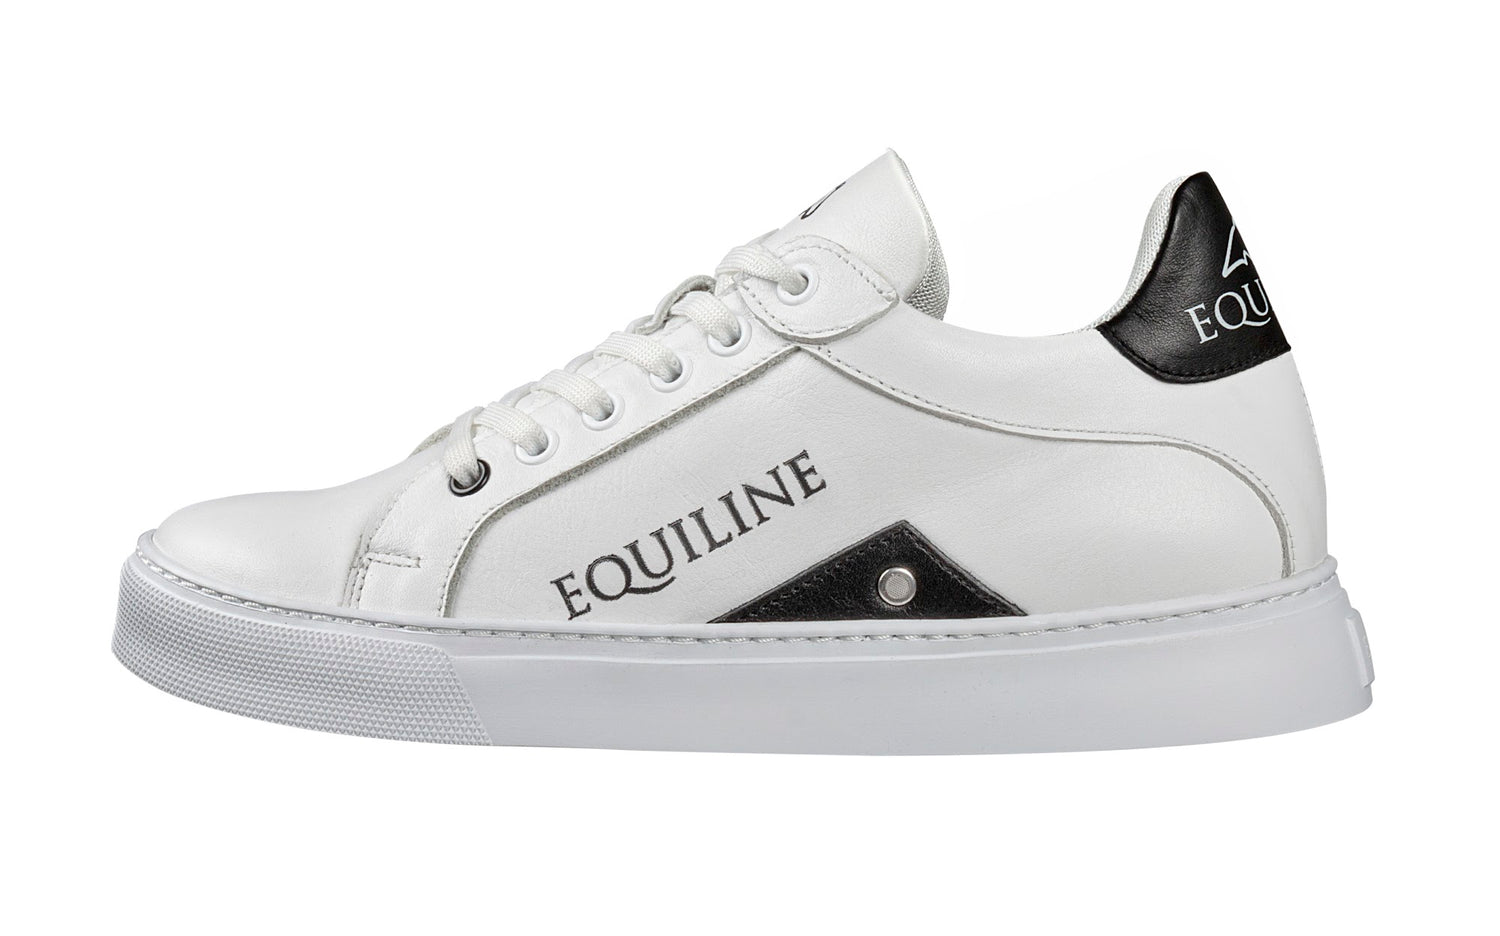 Reduced! Equiline Leather Trainers